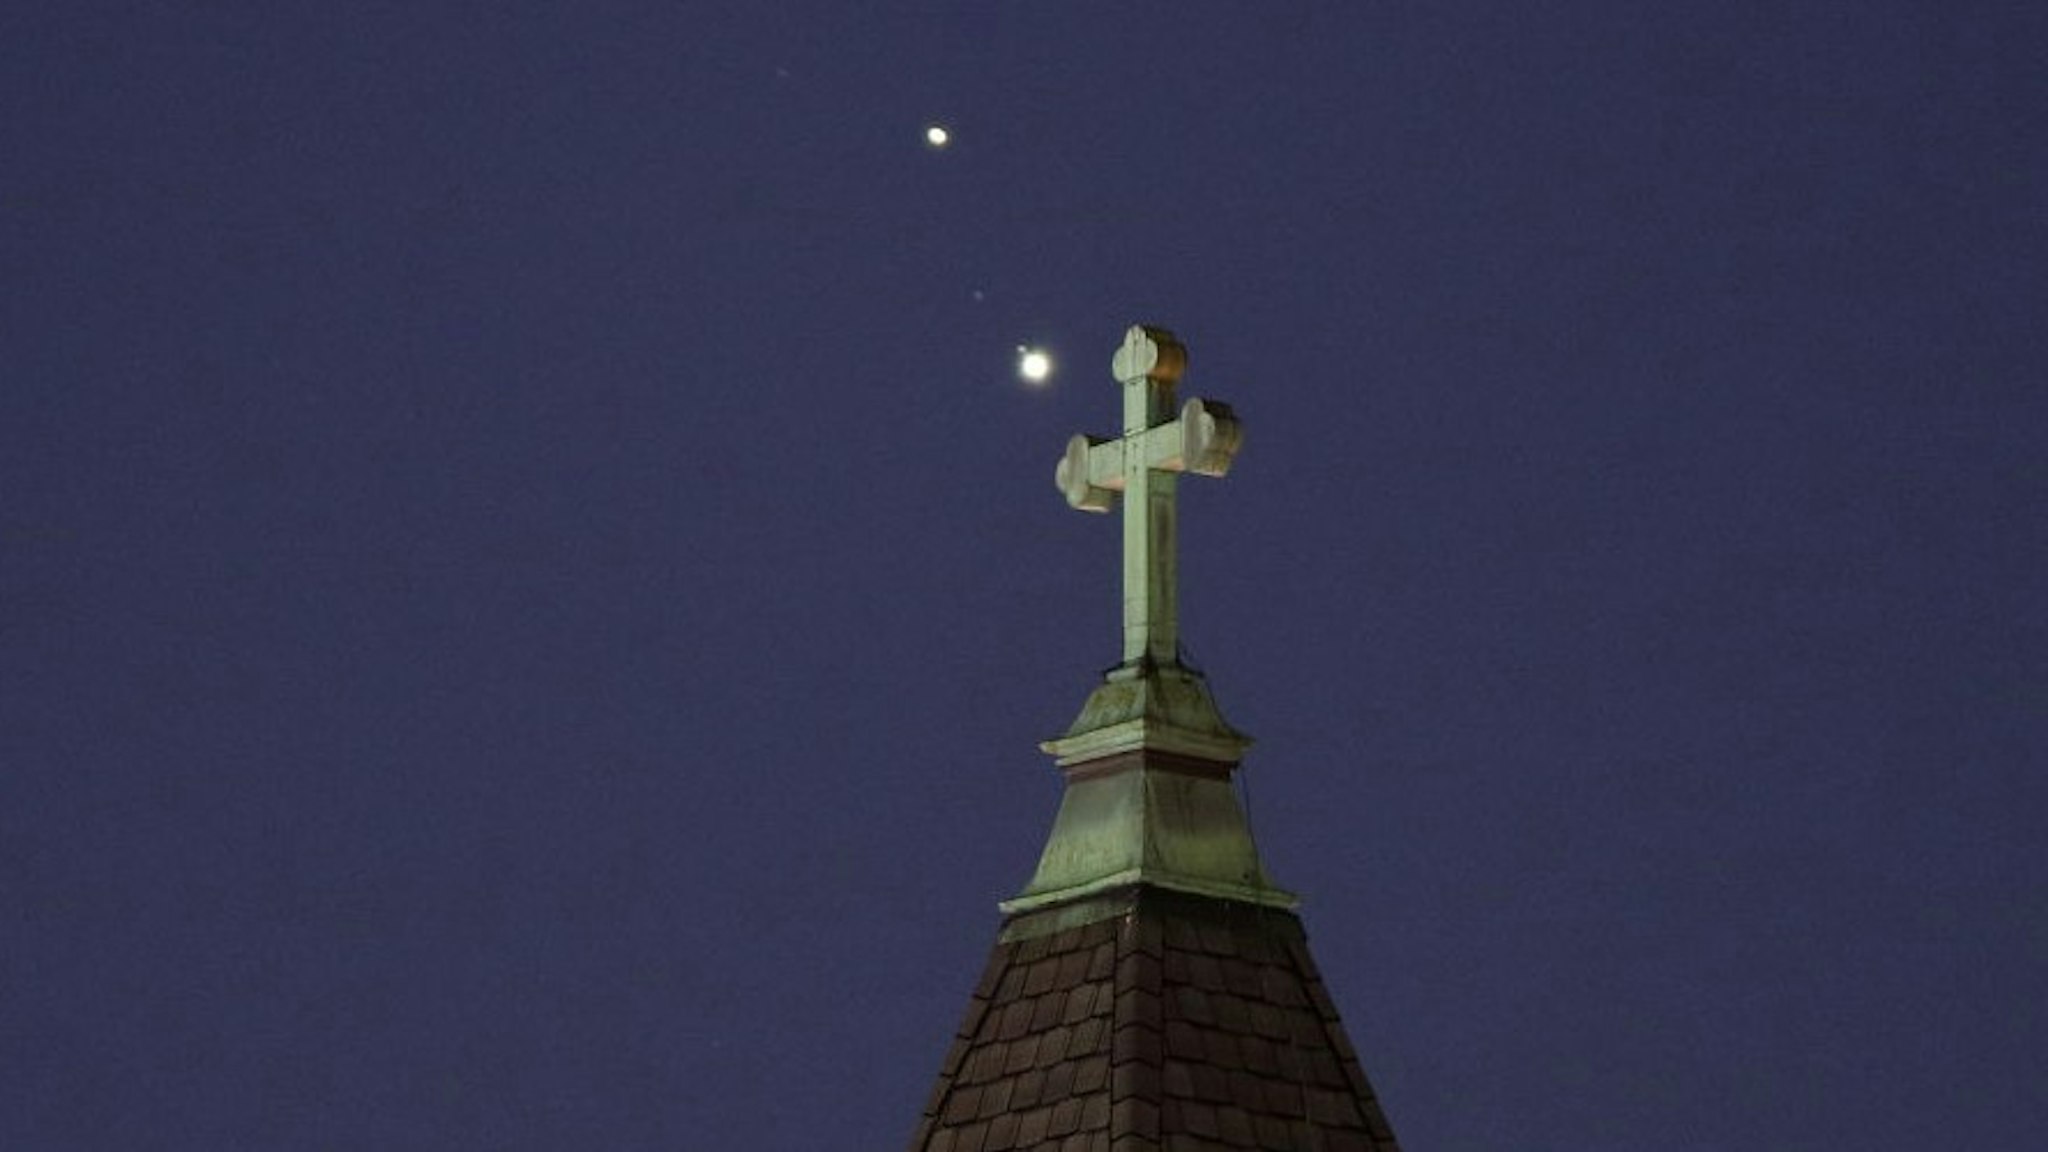 JERSEY CITY, NJ - DECEMBER 18: Saturn and Jupiter set behind a church ahead of their conjunction that is being called The Christmas Star next week on December 18, 2020 in Jersey City, New Jersey. (Photo by